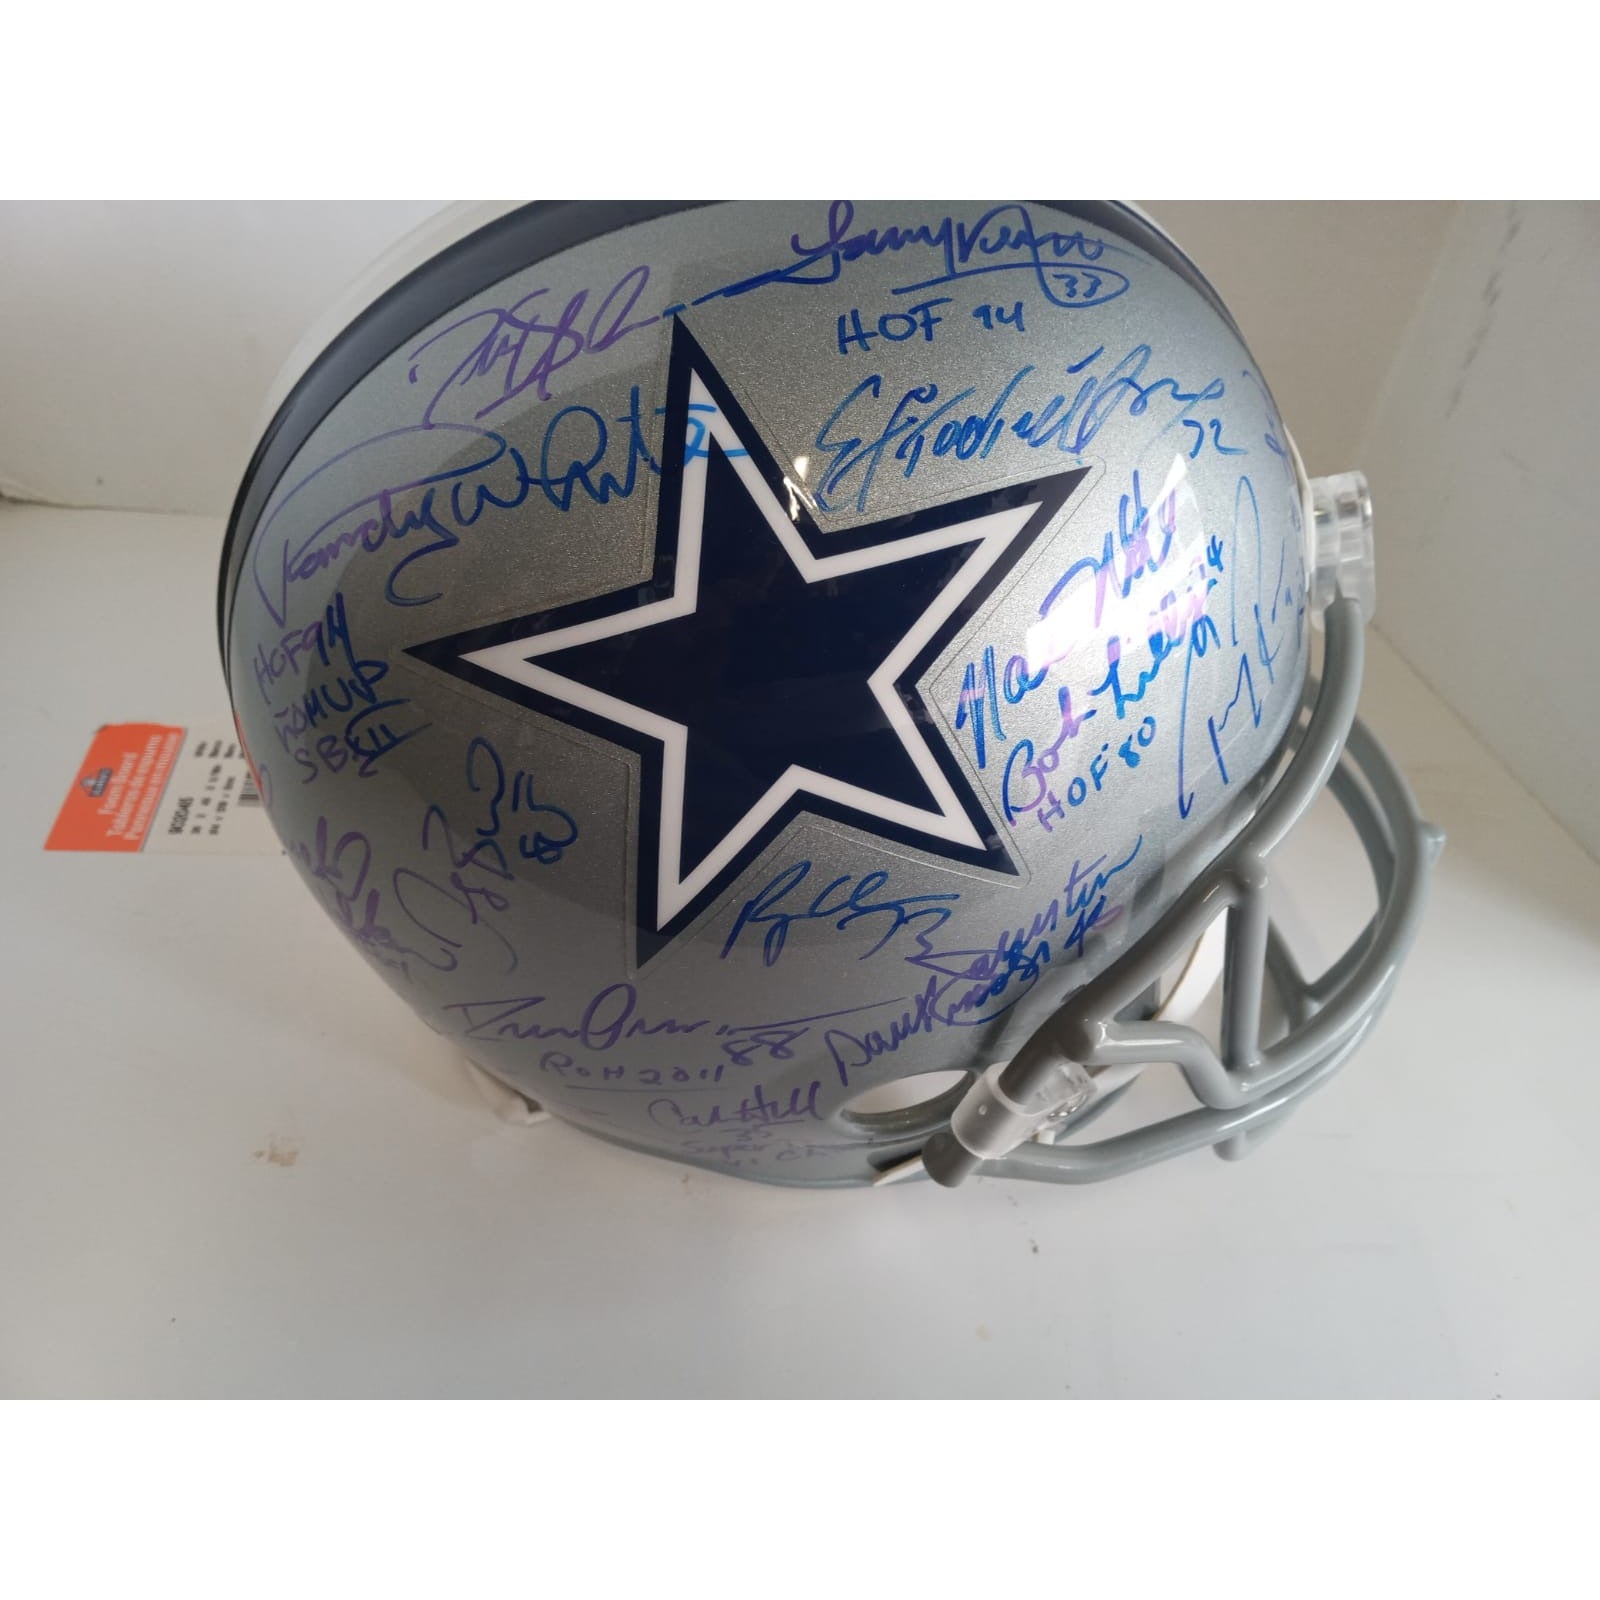 Dallas Cowboys Emmitt Smith Roger Staubach Tony Romo 25 all-time greats signed helmet with proof